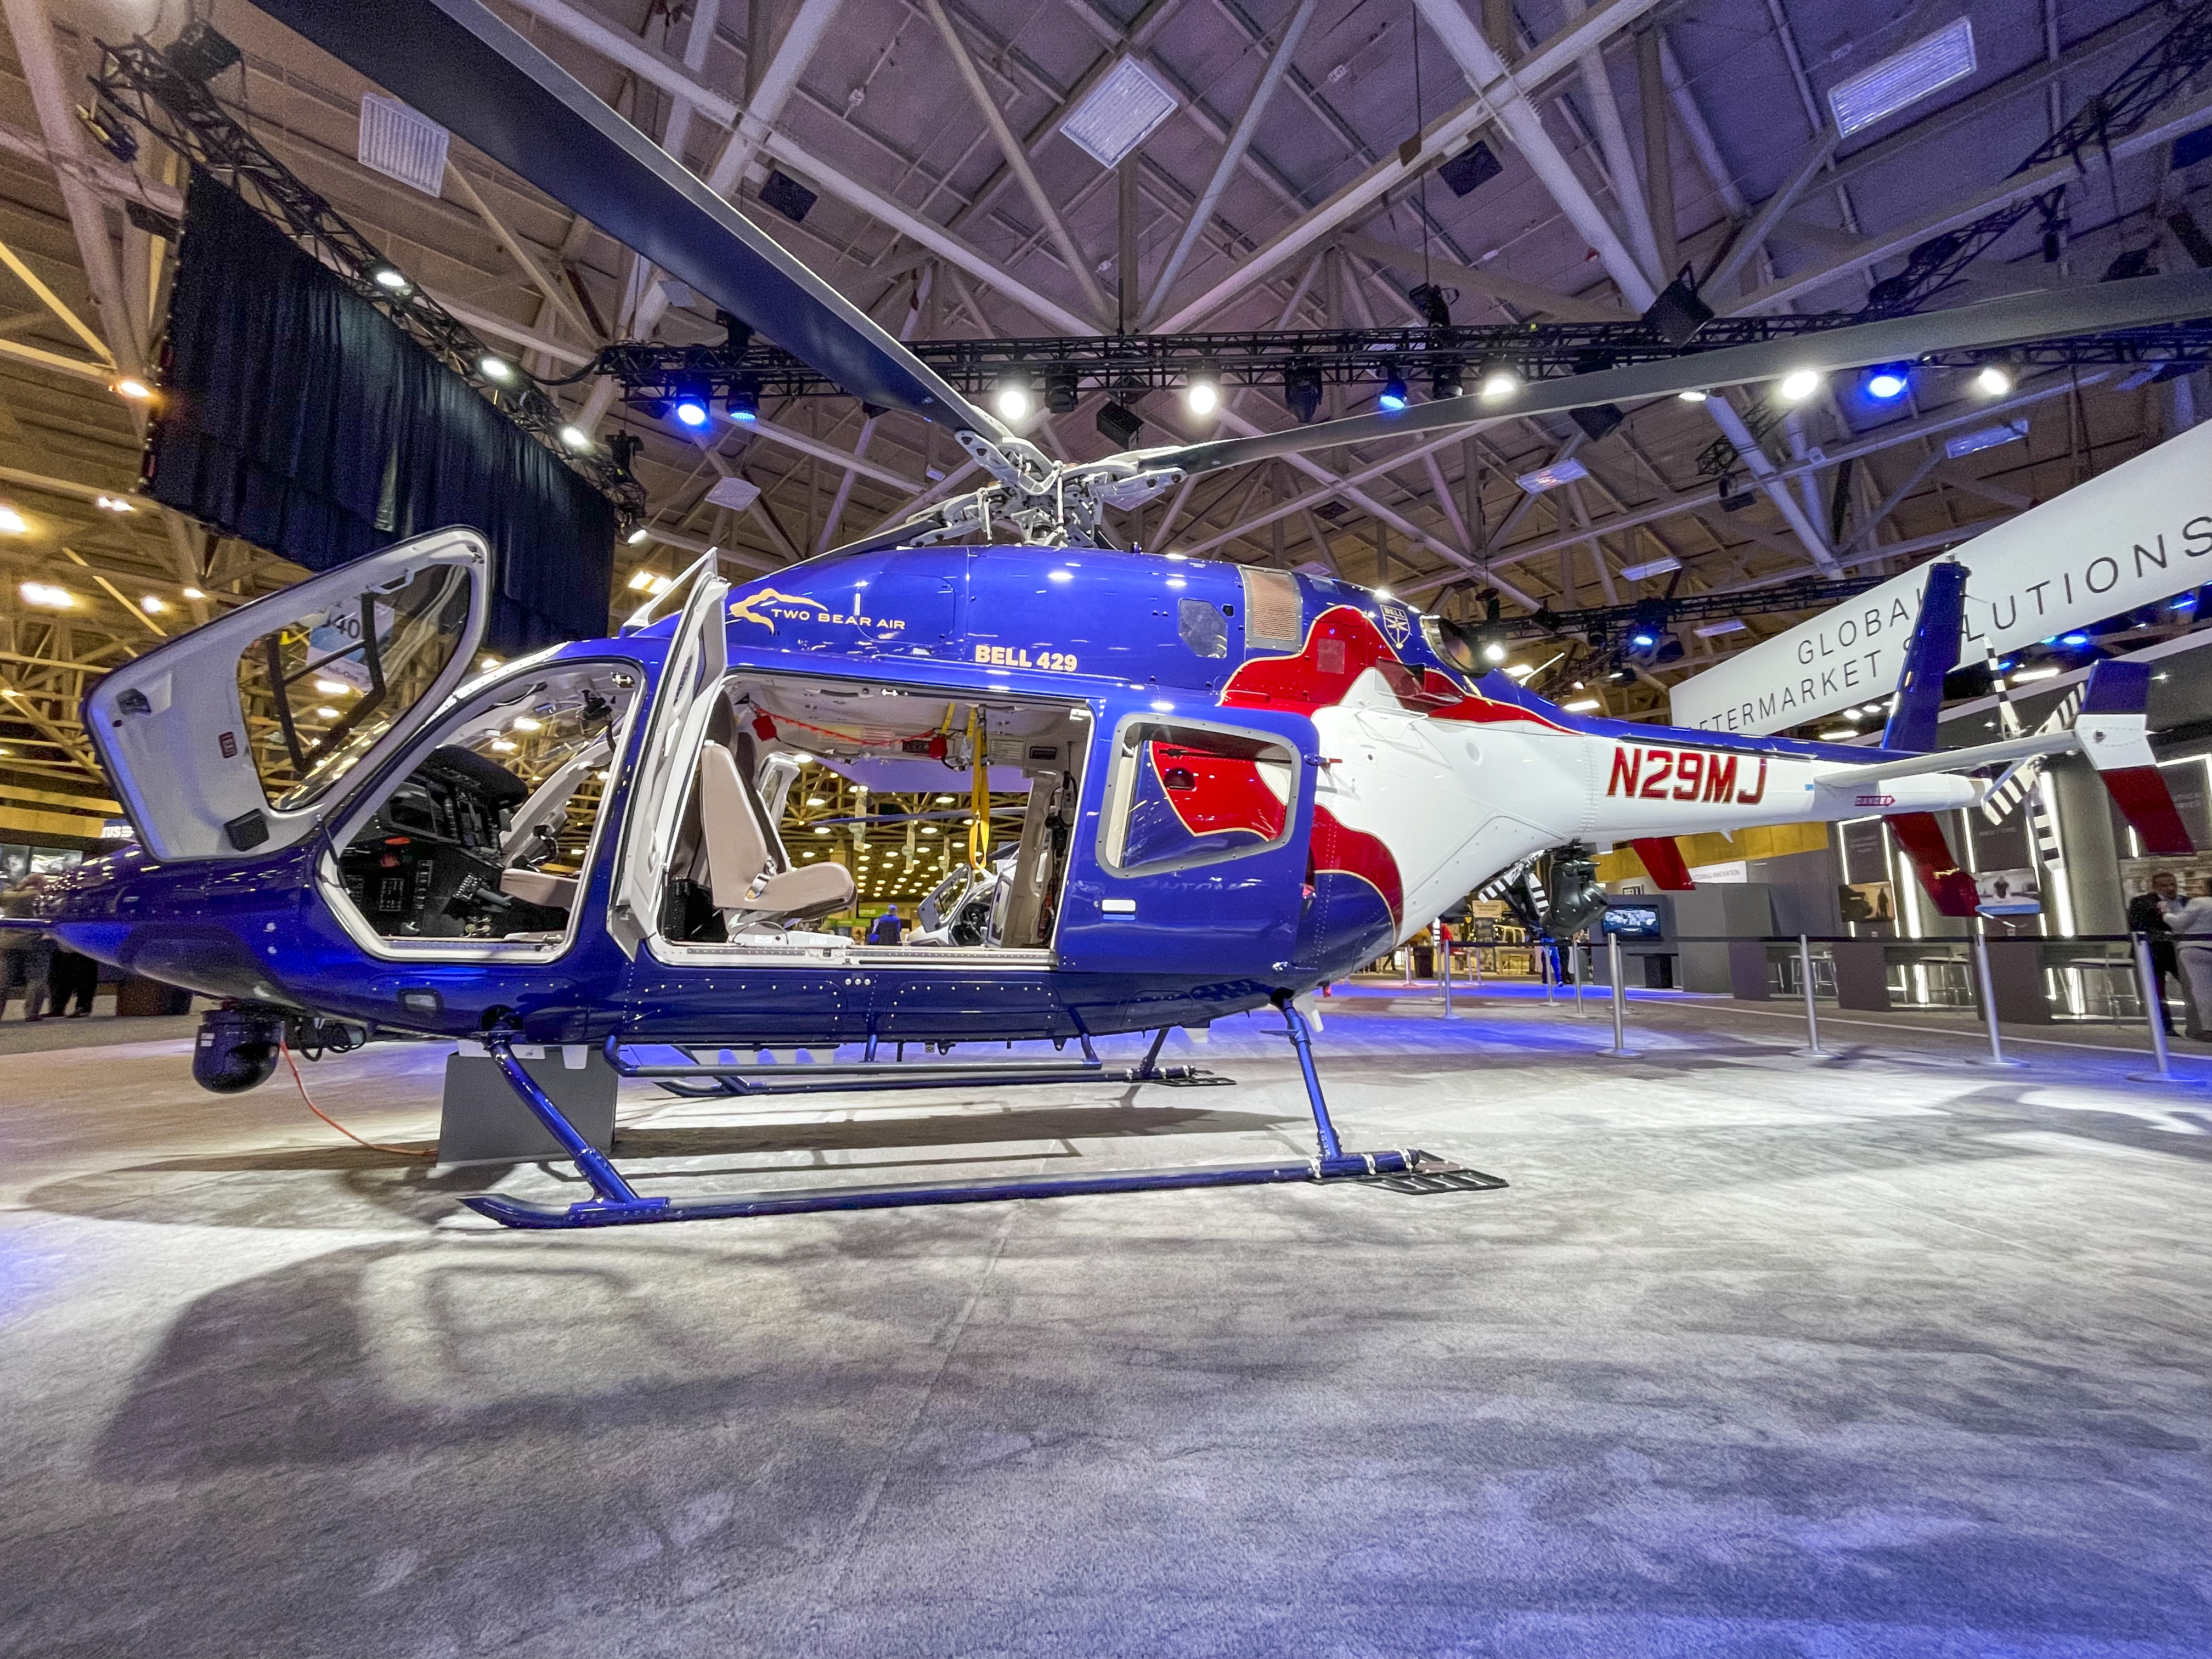 Two Bear Air's Bell 429 rescue helicopter sits with doors open at Helicopter Association International’s Heli-Expo. Photo by Cayla McLeod.